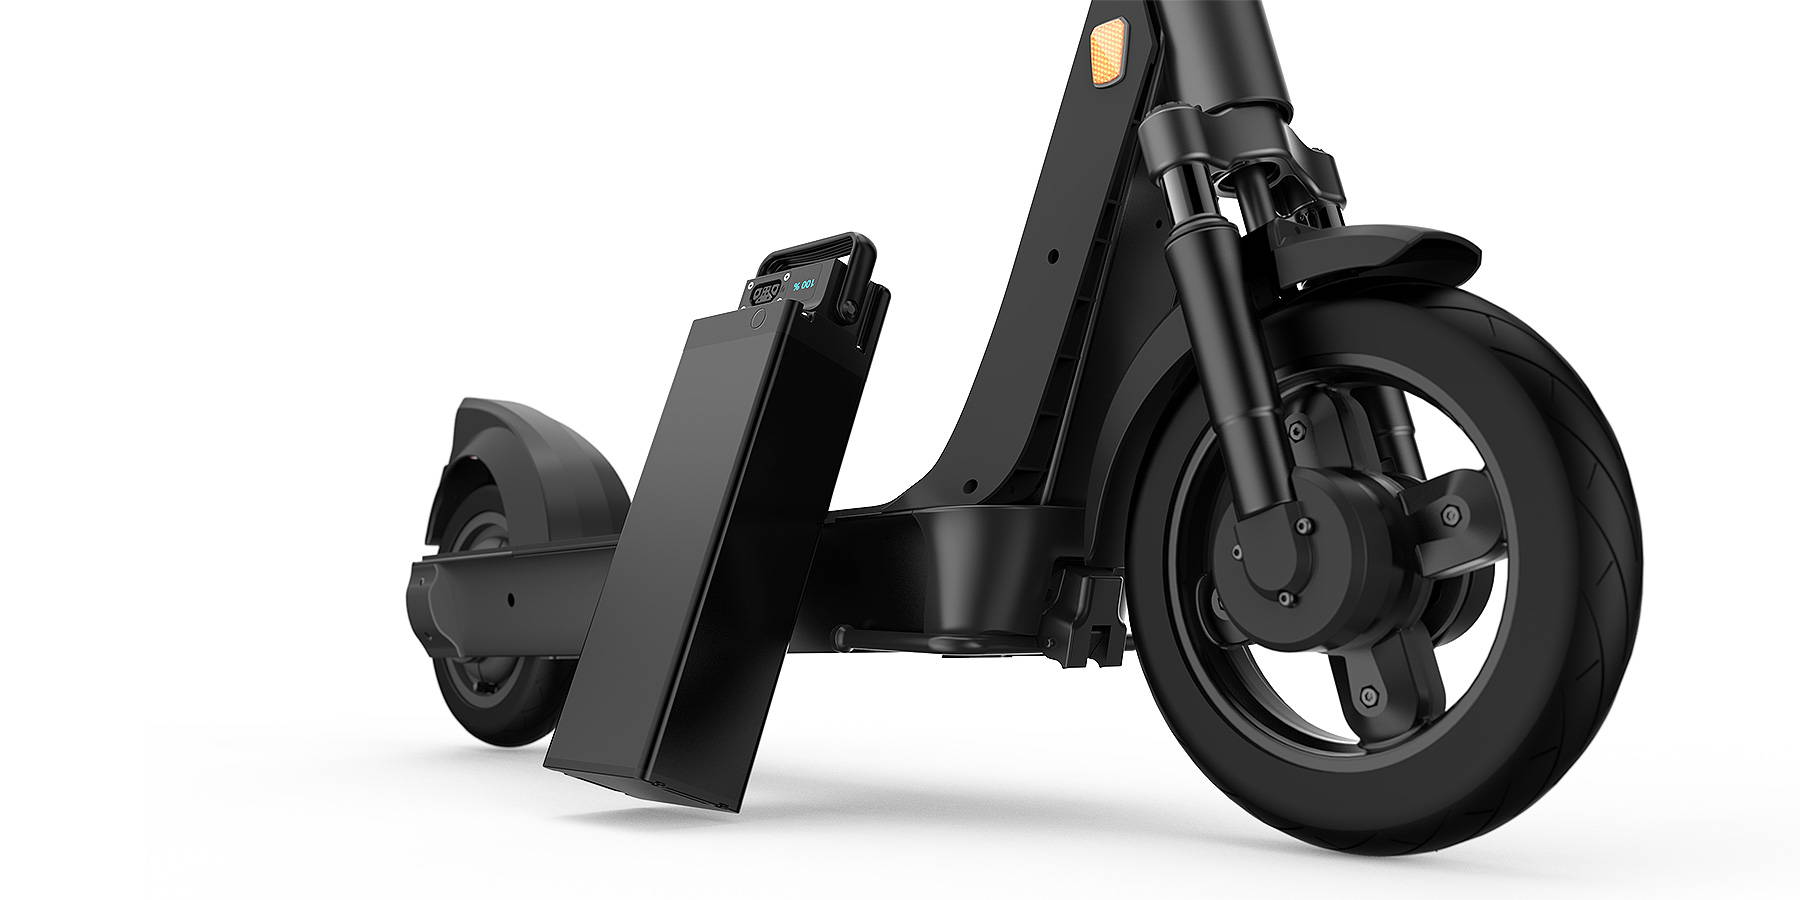 Get your Hands on a Swappable Battery E-Scooter from Okai